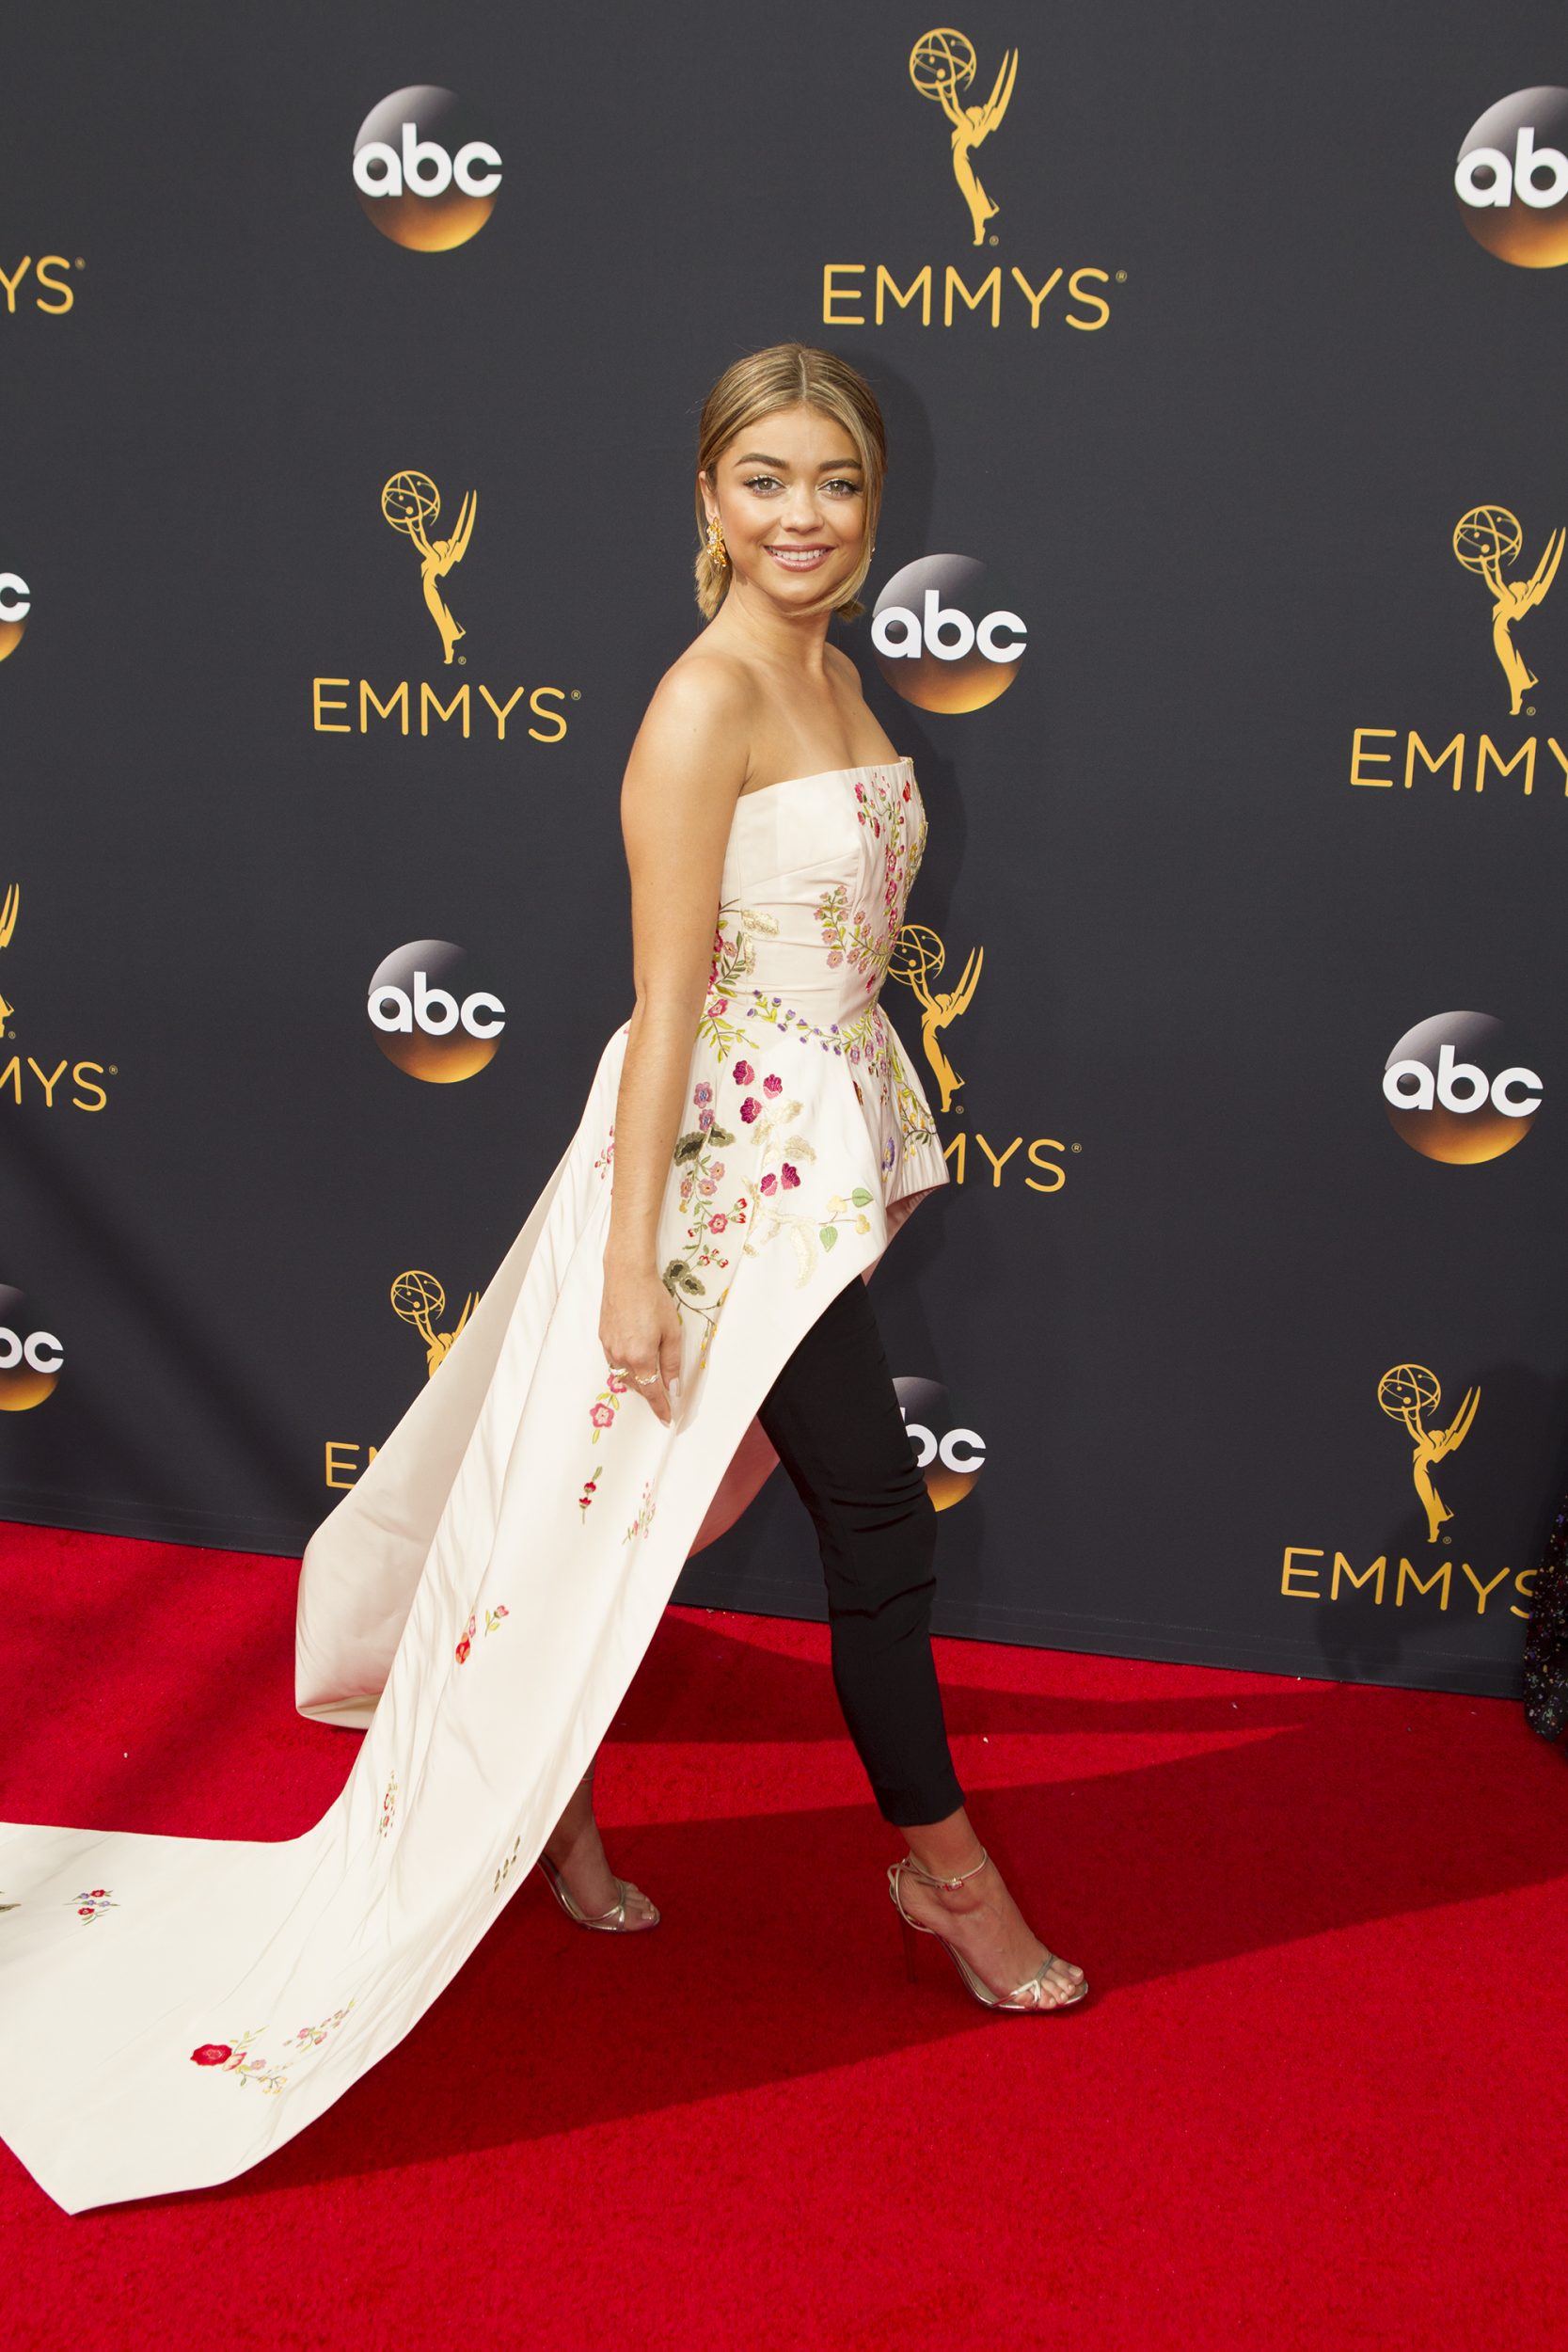 THE 68TH EMMY(r) AWARDS - “The 68th Emmy Awards” broadcasts live from The Microsoft Theater in Los Angeles, Sunday, September 18 (7:00-11:00 p.m. EDT/4:00-8:00 p.m. PDT), on ABC and is hosted by Jimmy Kimmel. (ABC/Rick Rowell) SARAH HYLAND